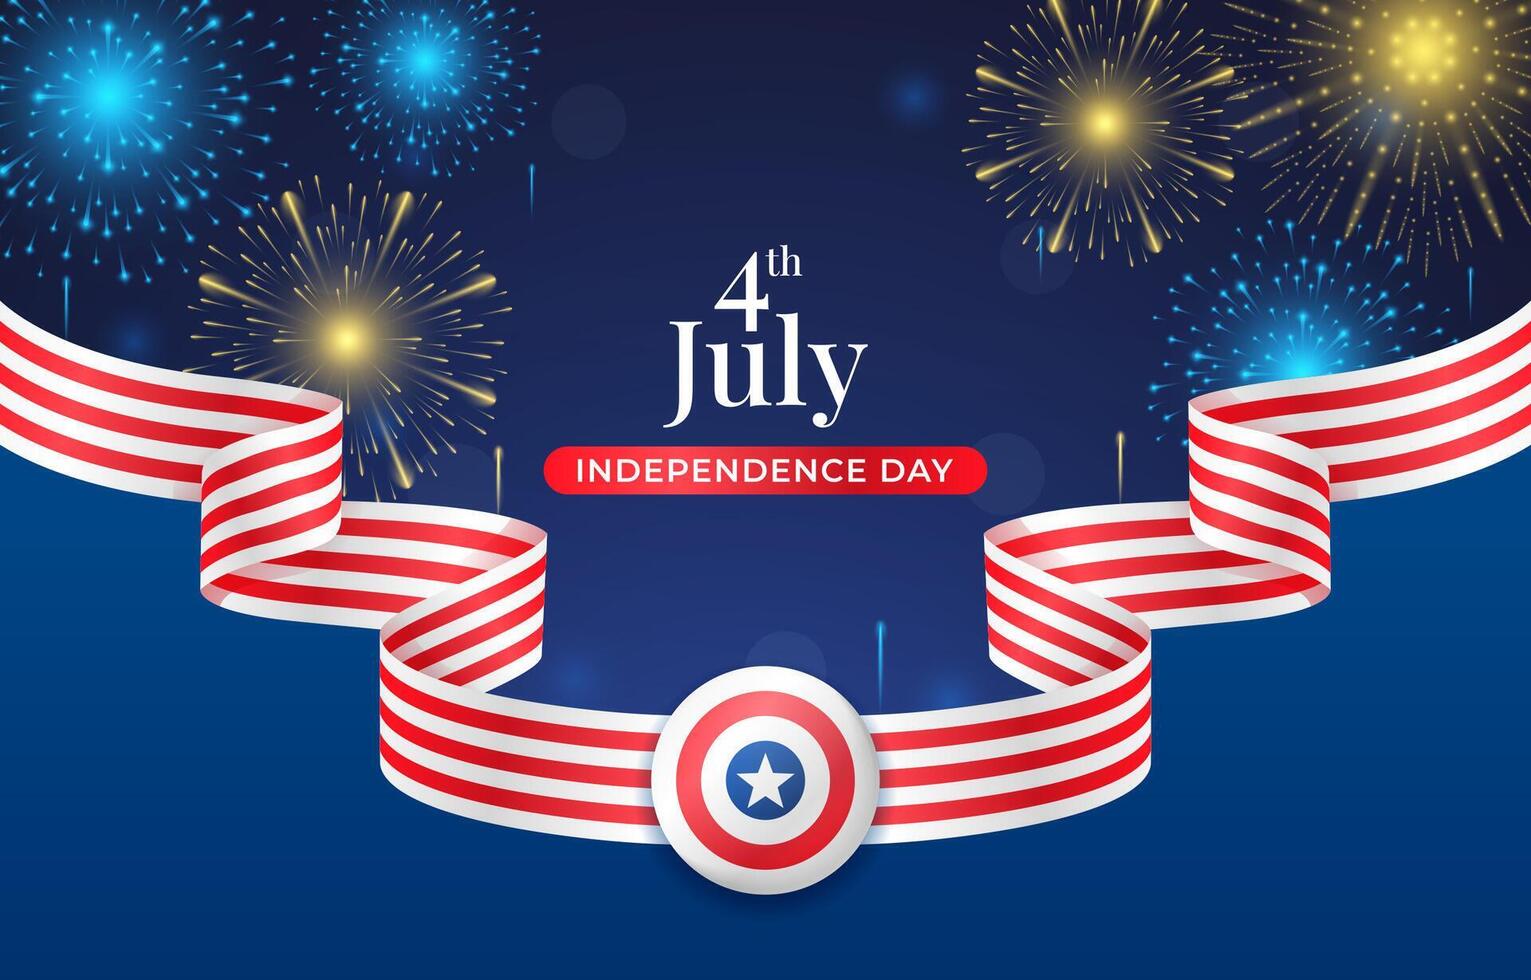 4th of July USA Independence Day Background with American Flag vector